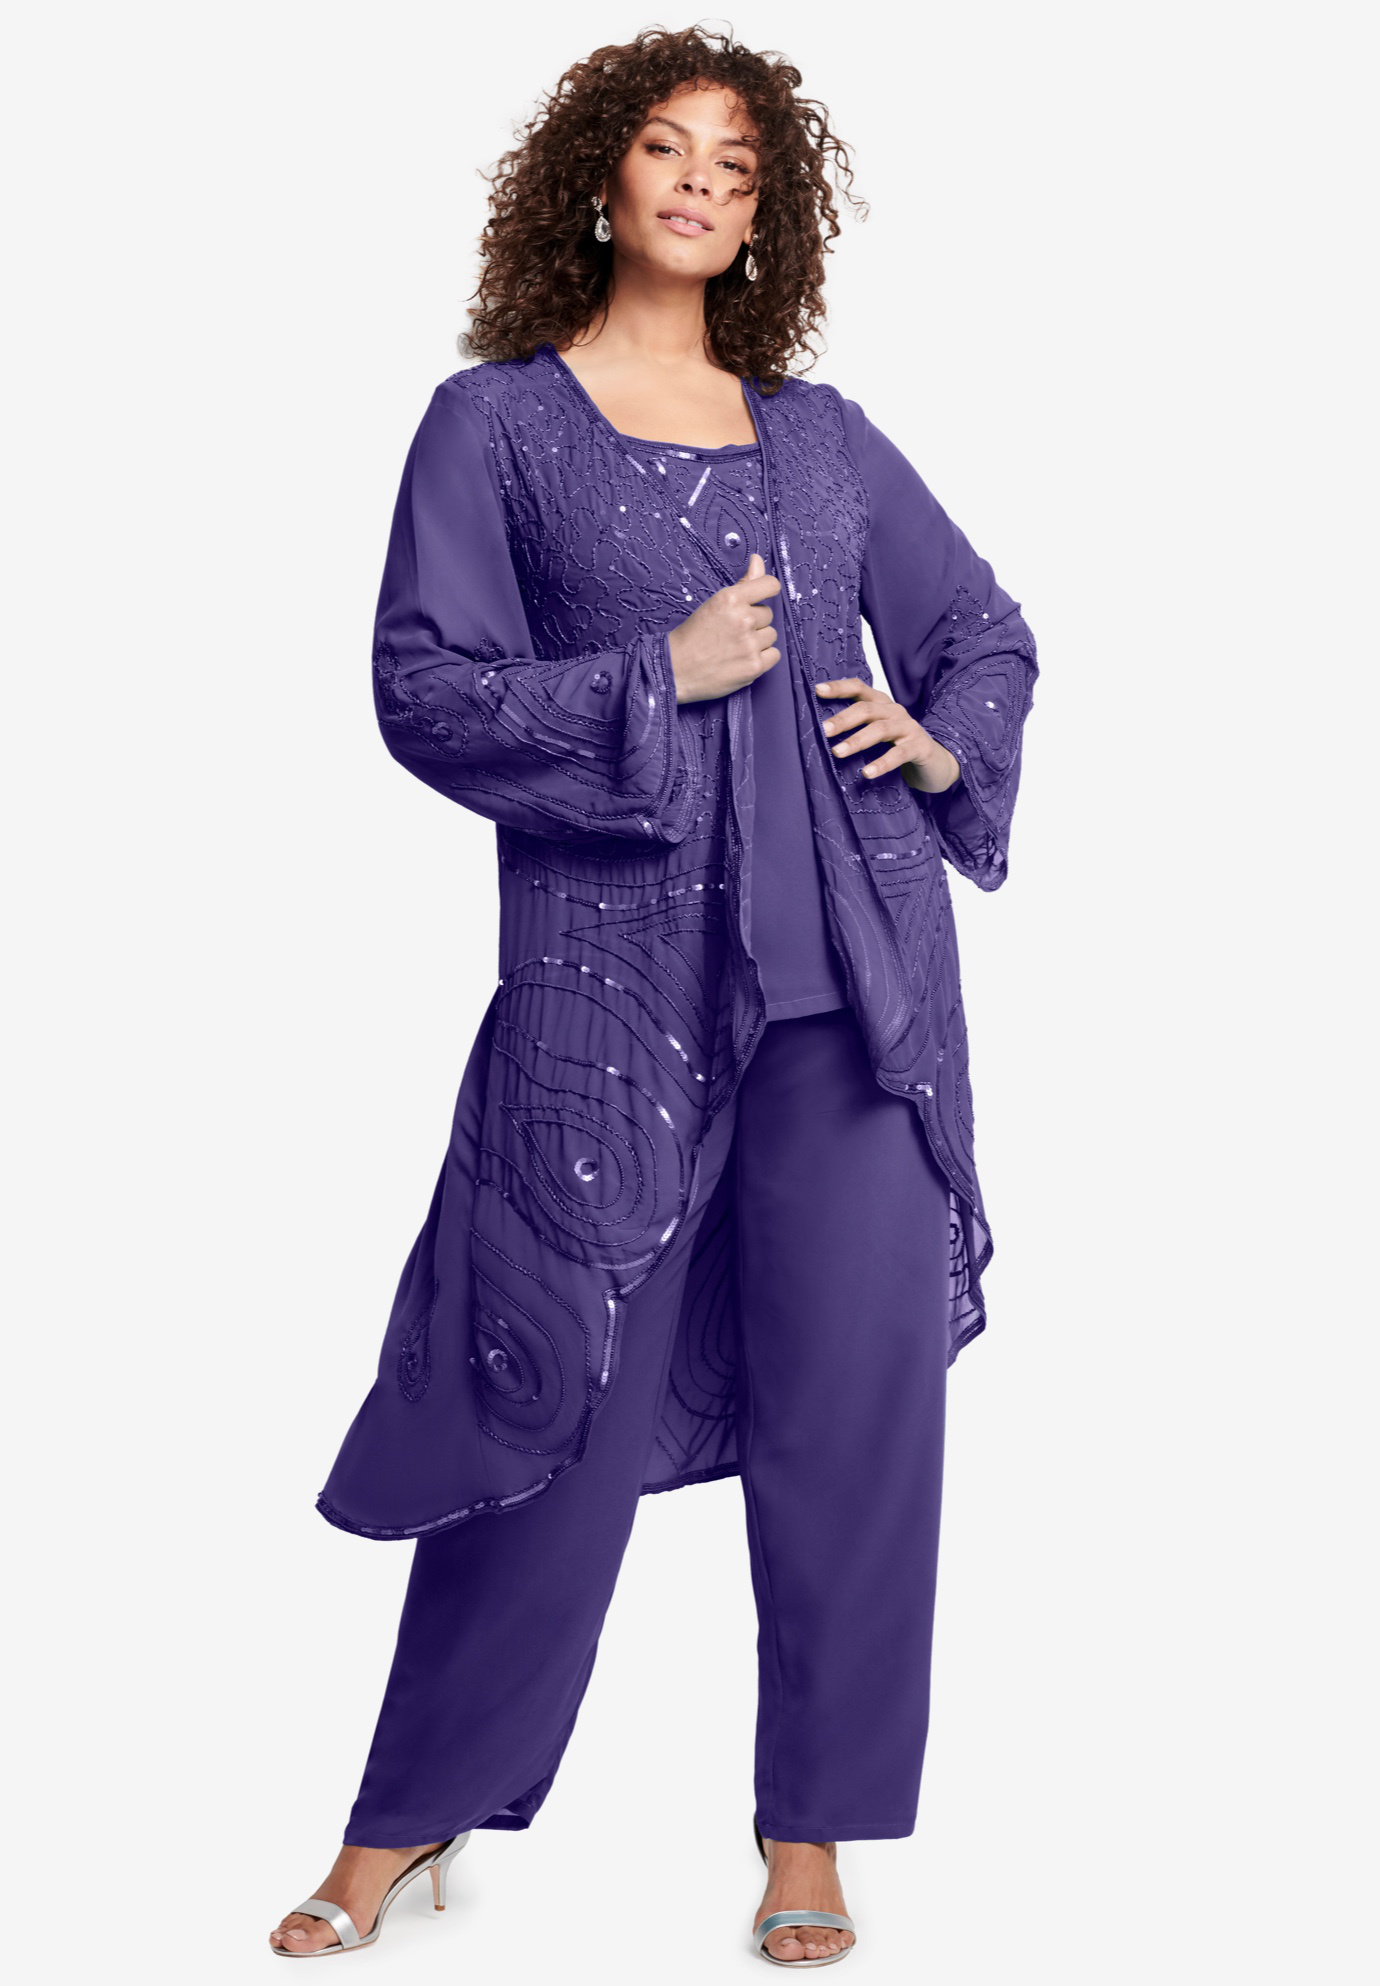 Plus Size Women's 3-Piece Lace Gala Pant Suit by Catherines in